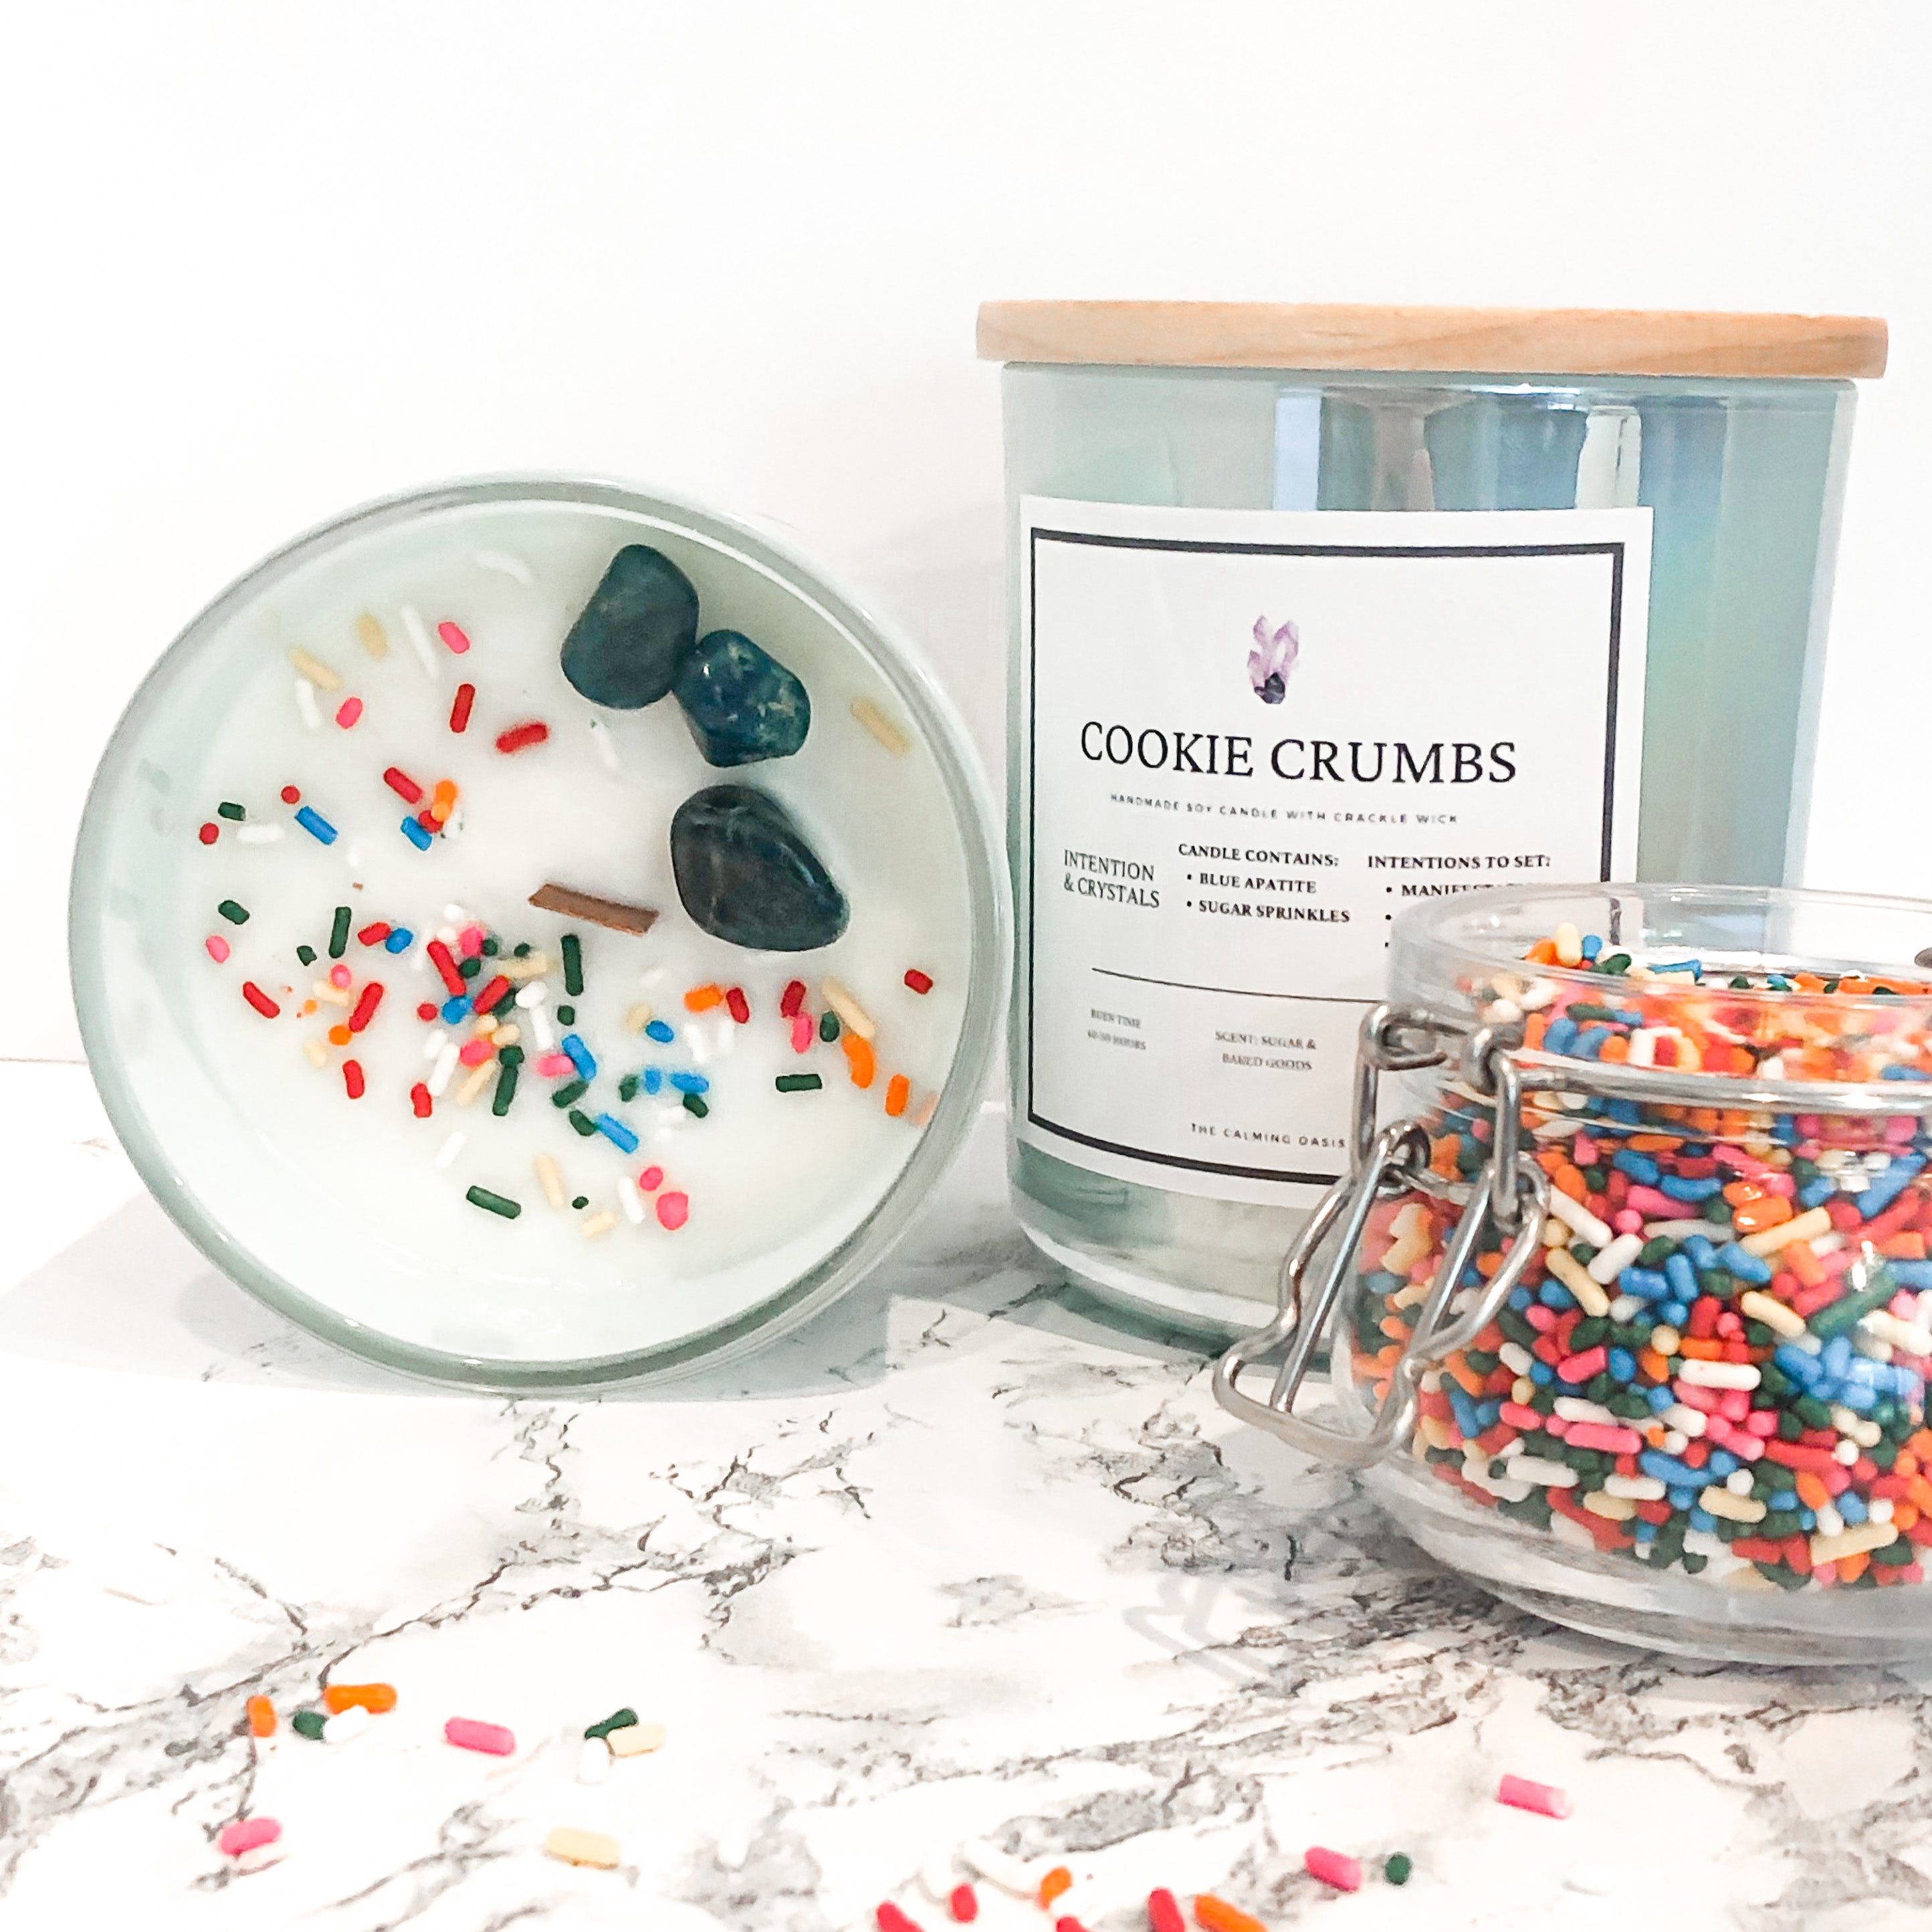 Cookie Crumbs | Blue Apatite Candle | 12.5oz Glass